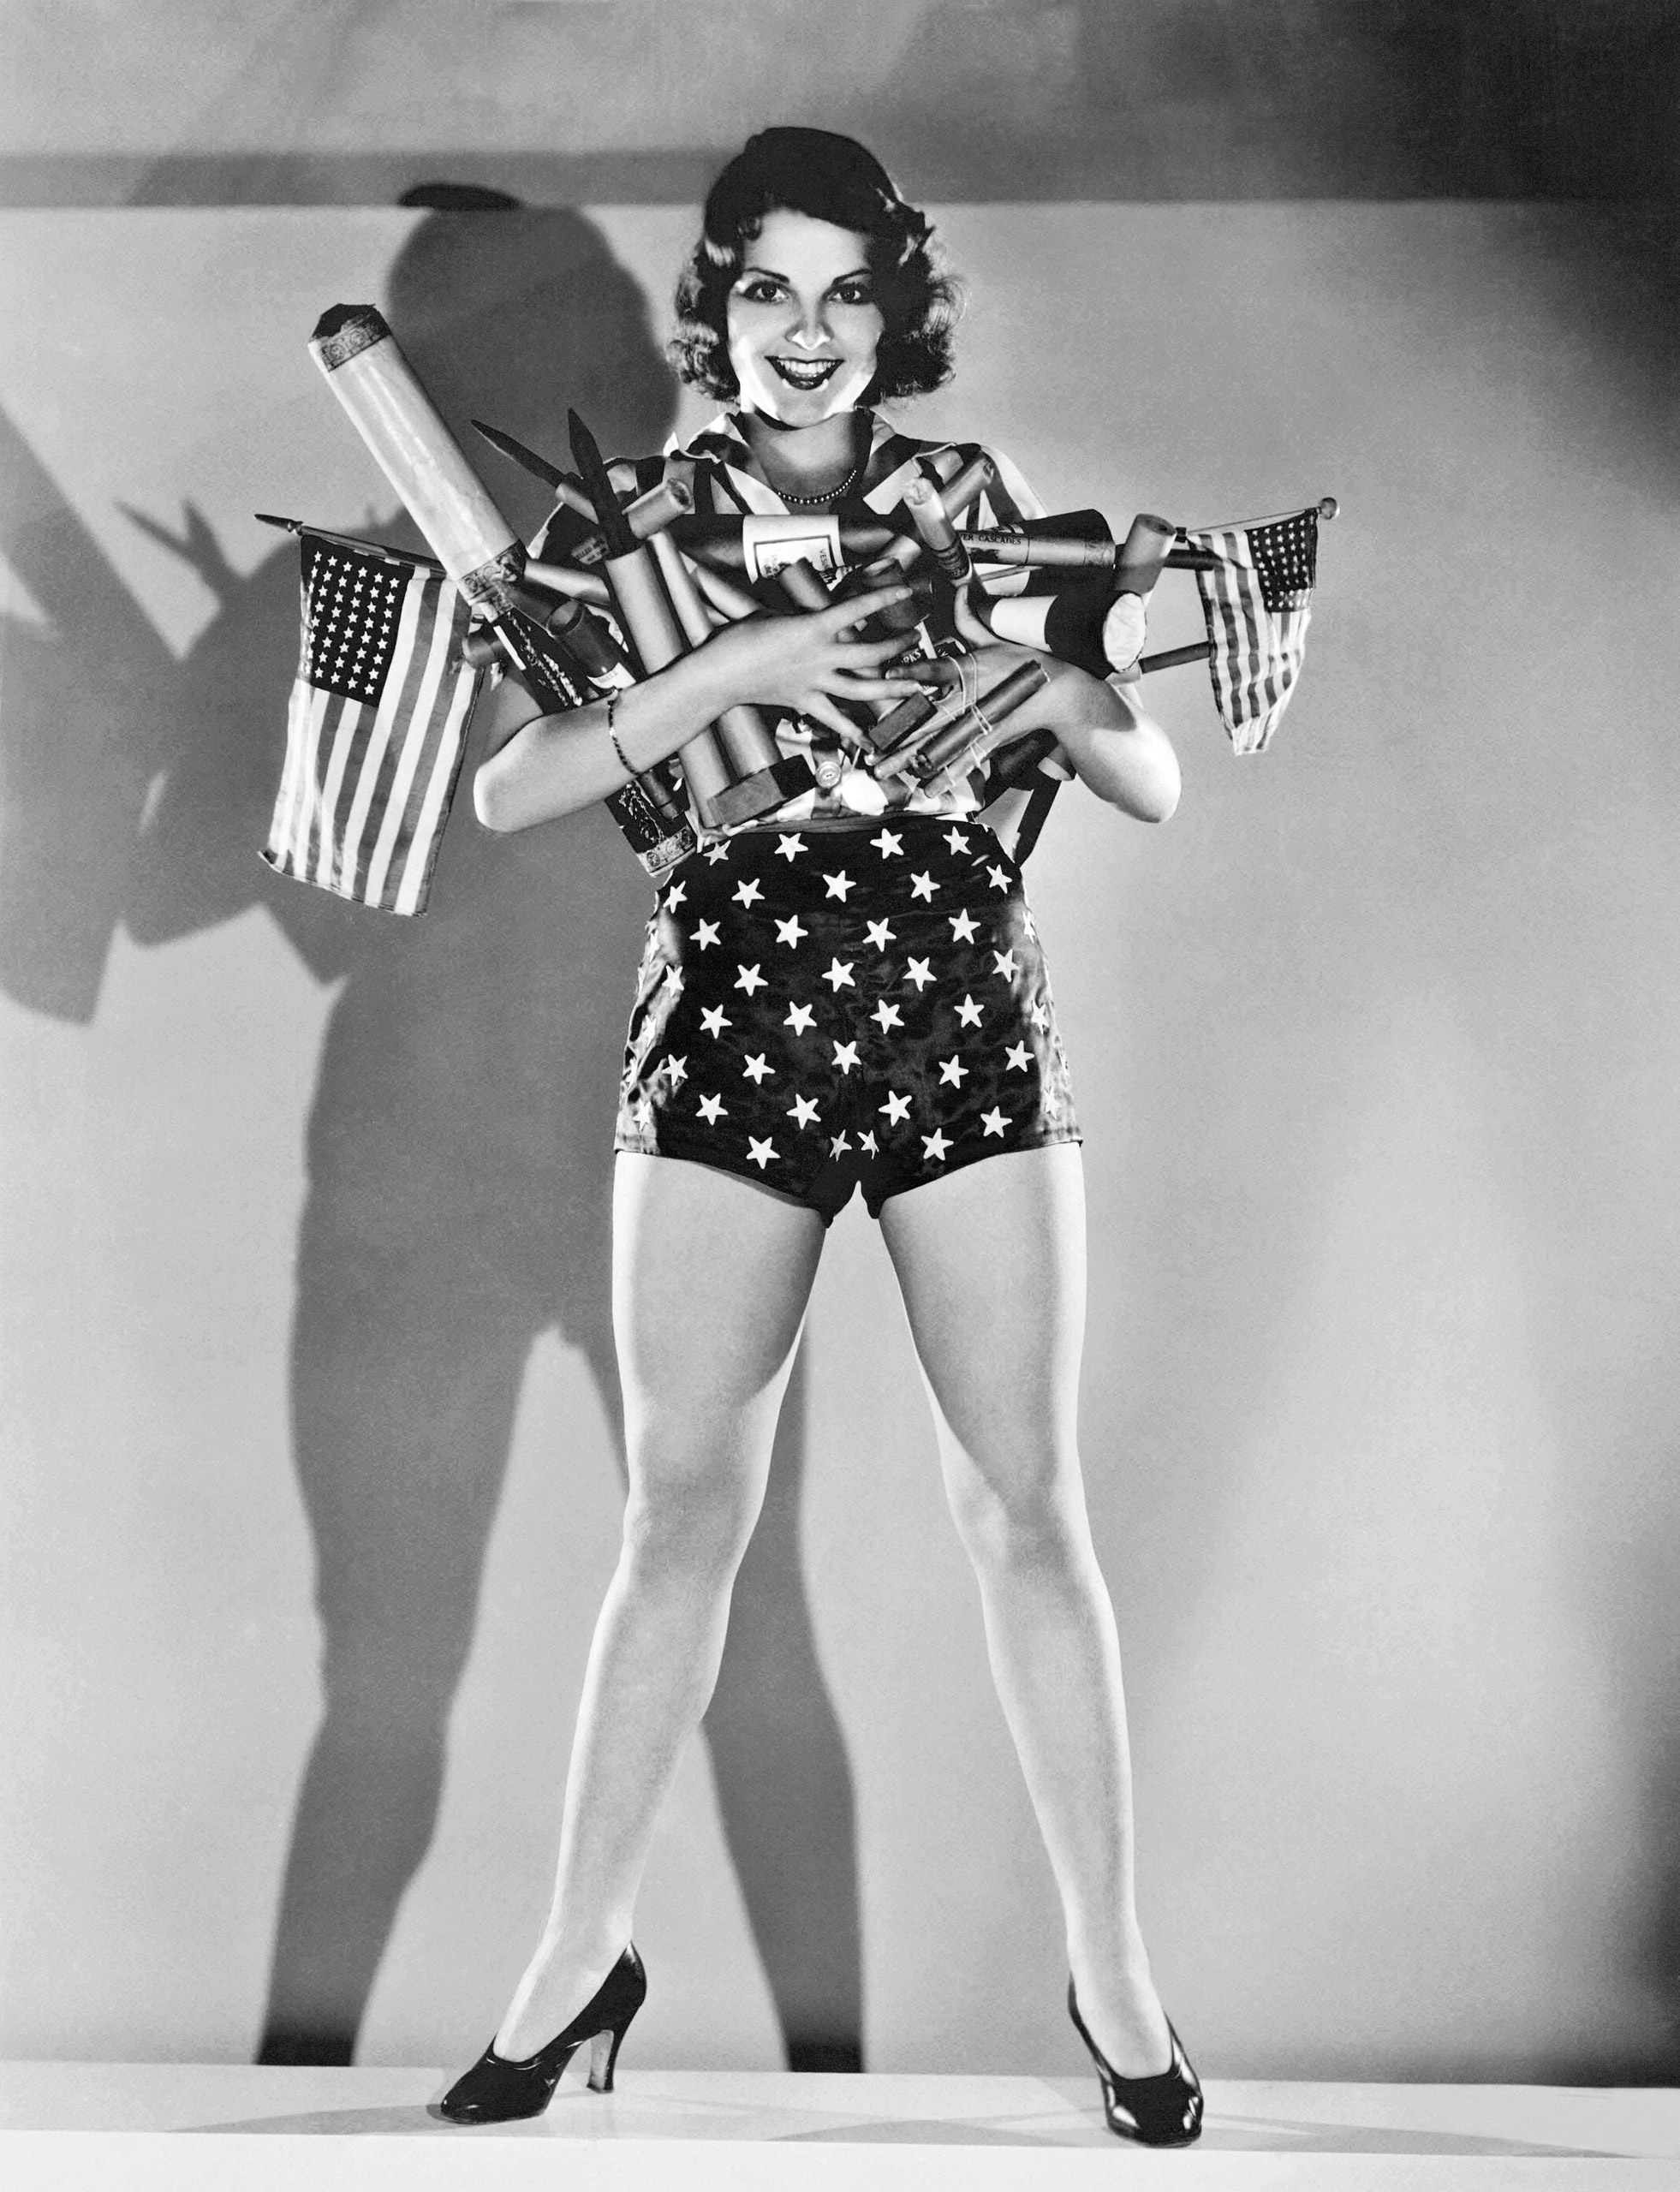 MGM actress Lillian Bond with an armload of fireworks for a Fourth of July celebration, Hollywood, California, circa 1930.